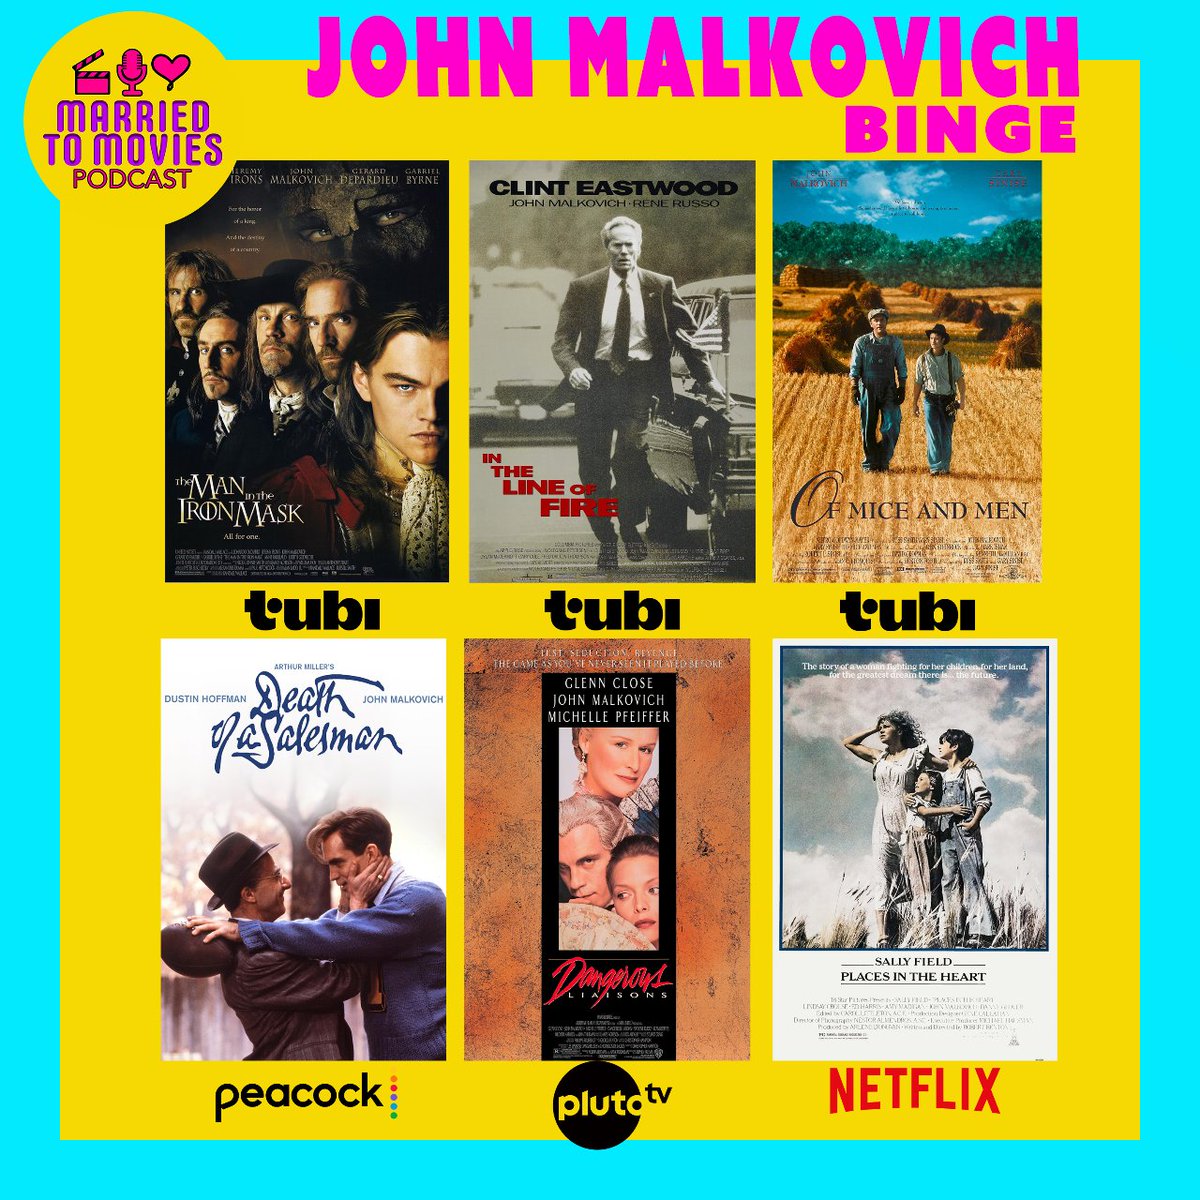 Married to Movies has you covered! It's Friday night and you're looking to chill?
Watch the podcast on Youtube: youtu.be/X2CgL9DyOeI
#Married2MovPod, #MarriedToMovies, #jonrussellcring, #tracynicholecring, #movies, #johnmalkovich, #clinteastwood, #sallyfield, #glennclose